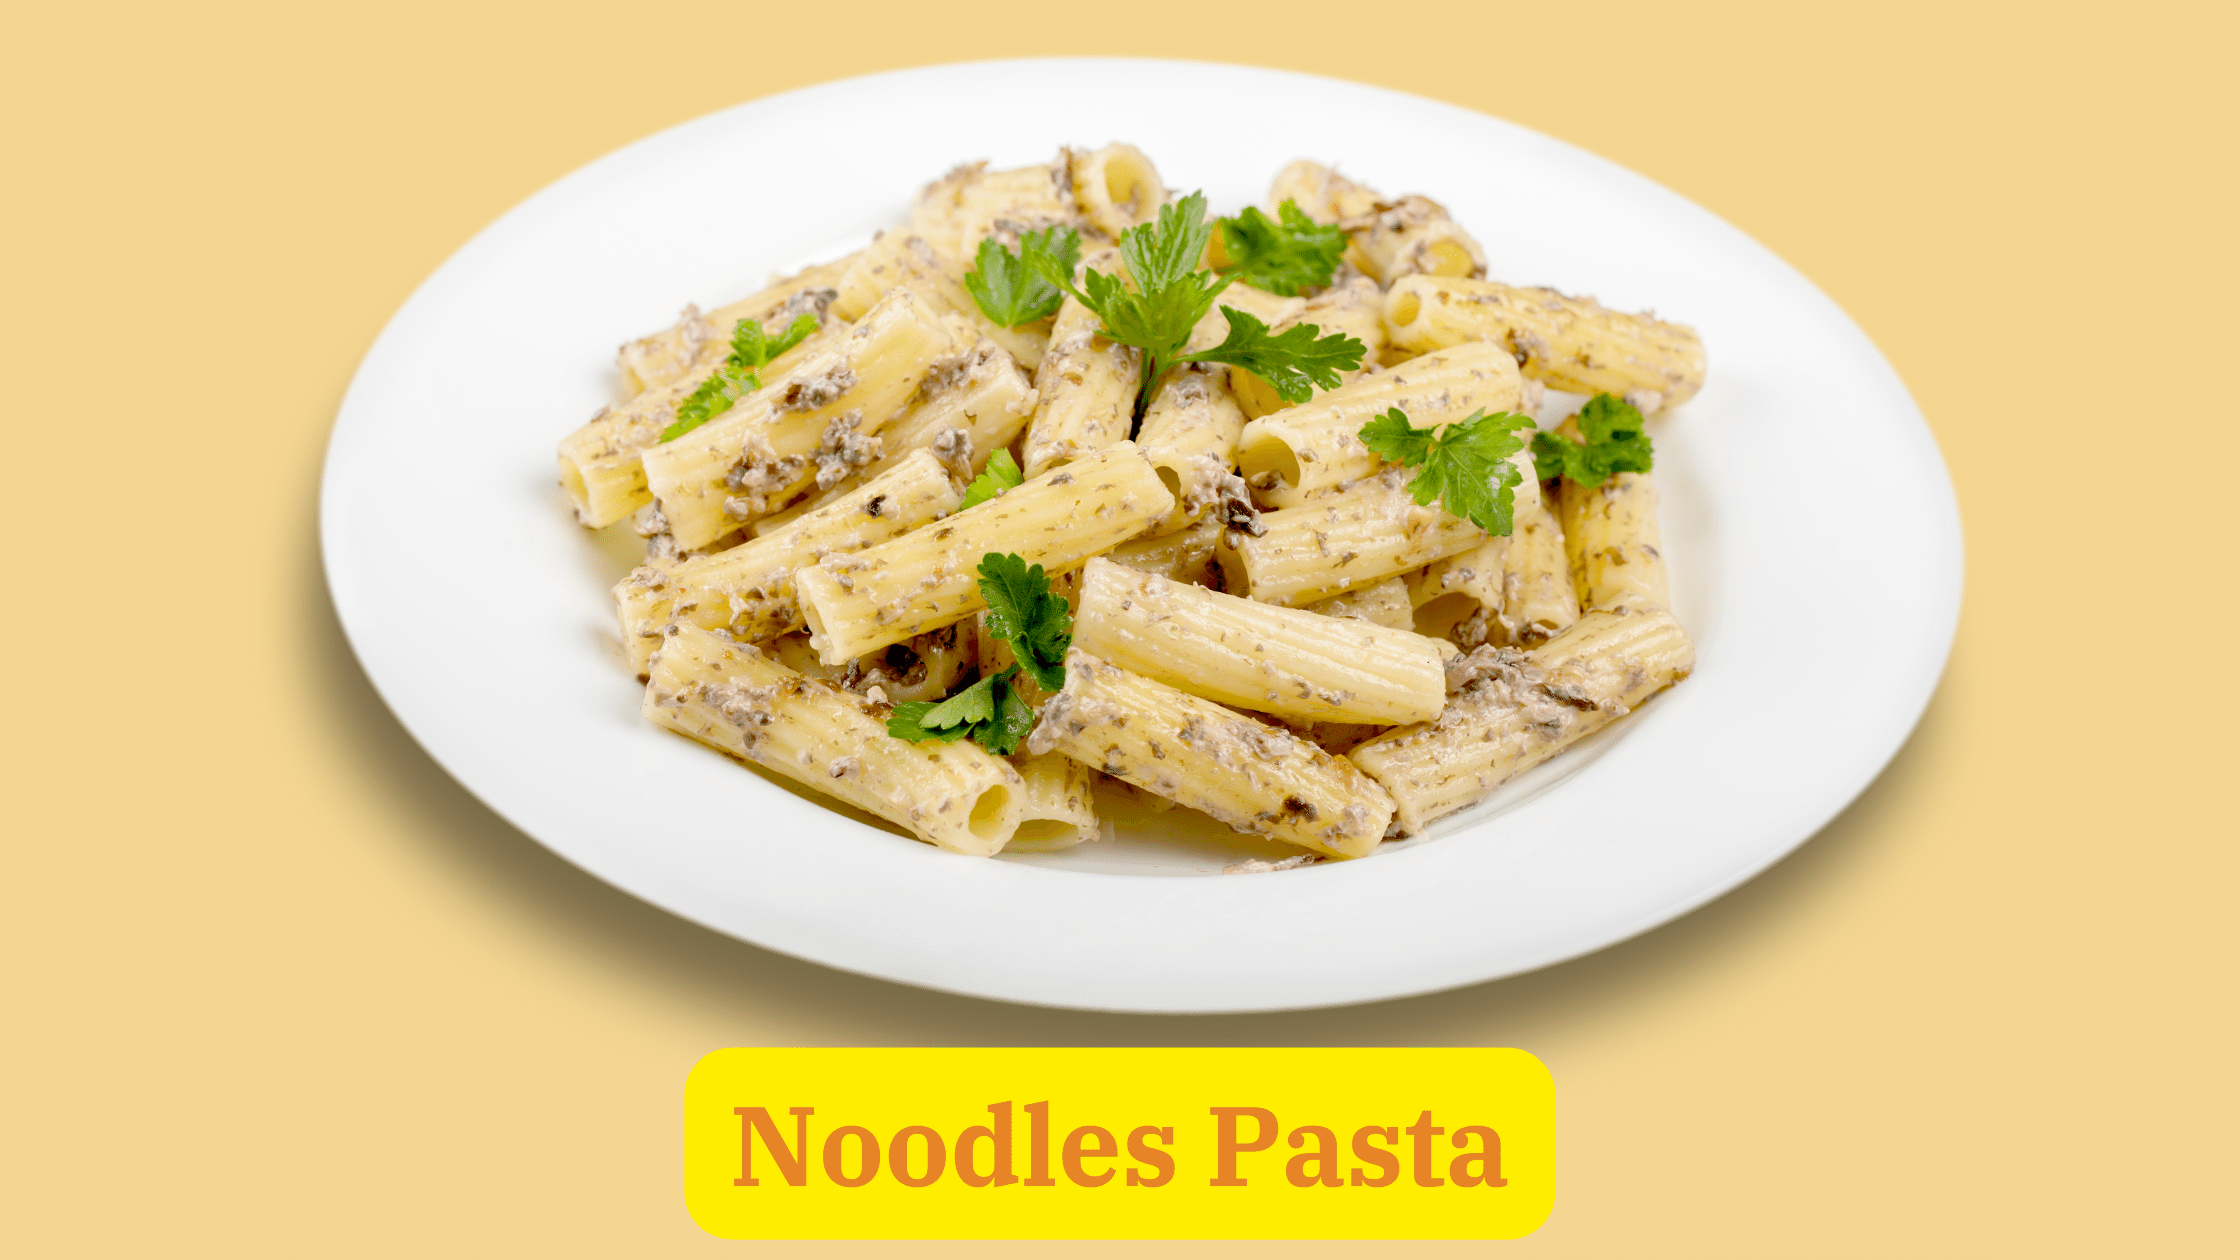 Are Noodles Pasta? Here’s You Find Answer